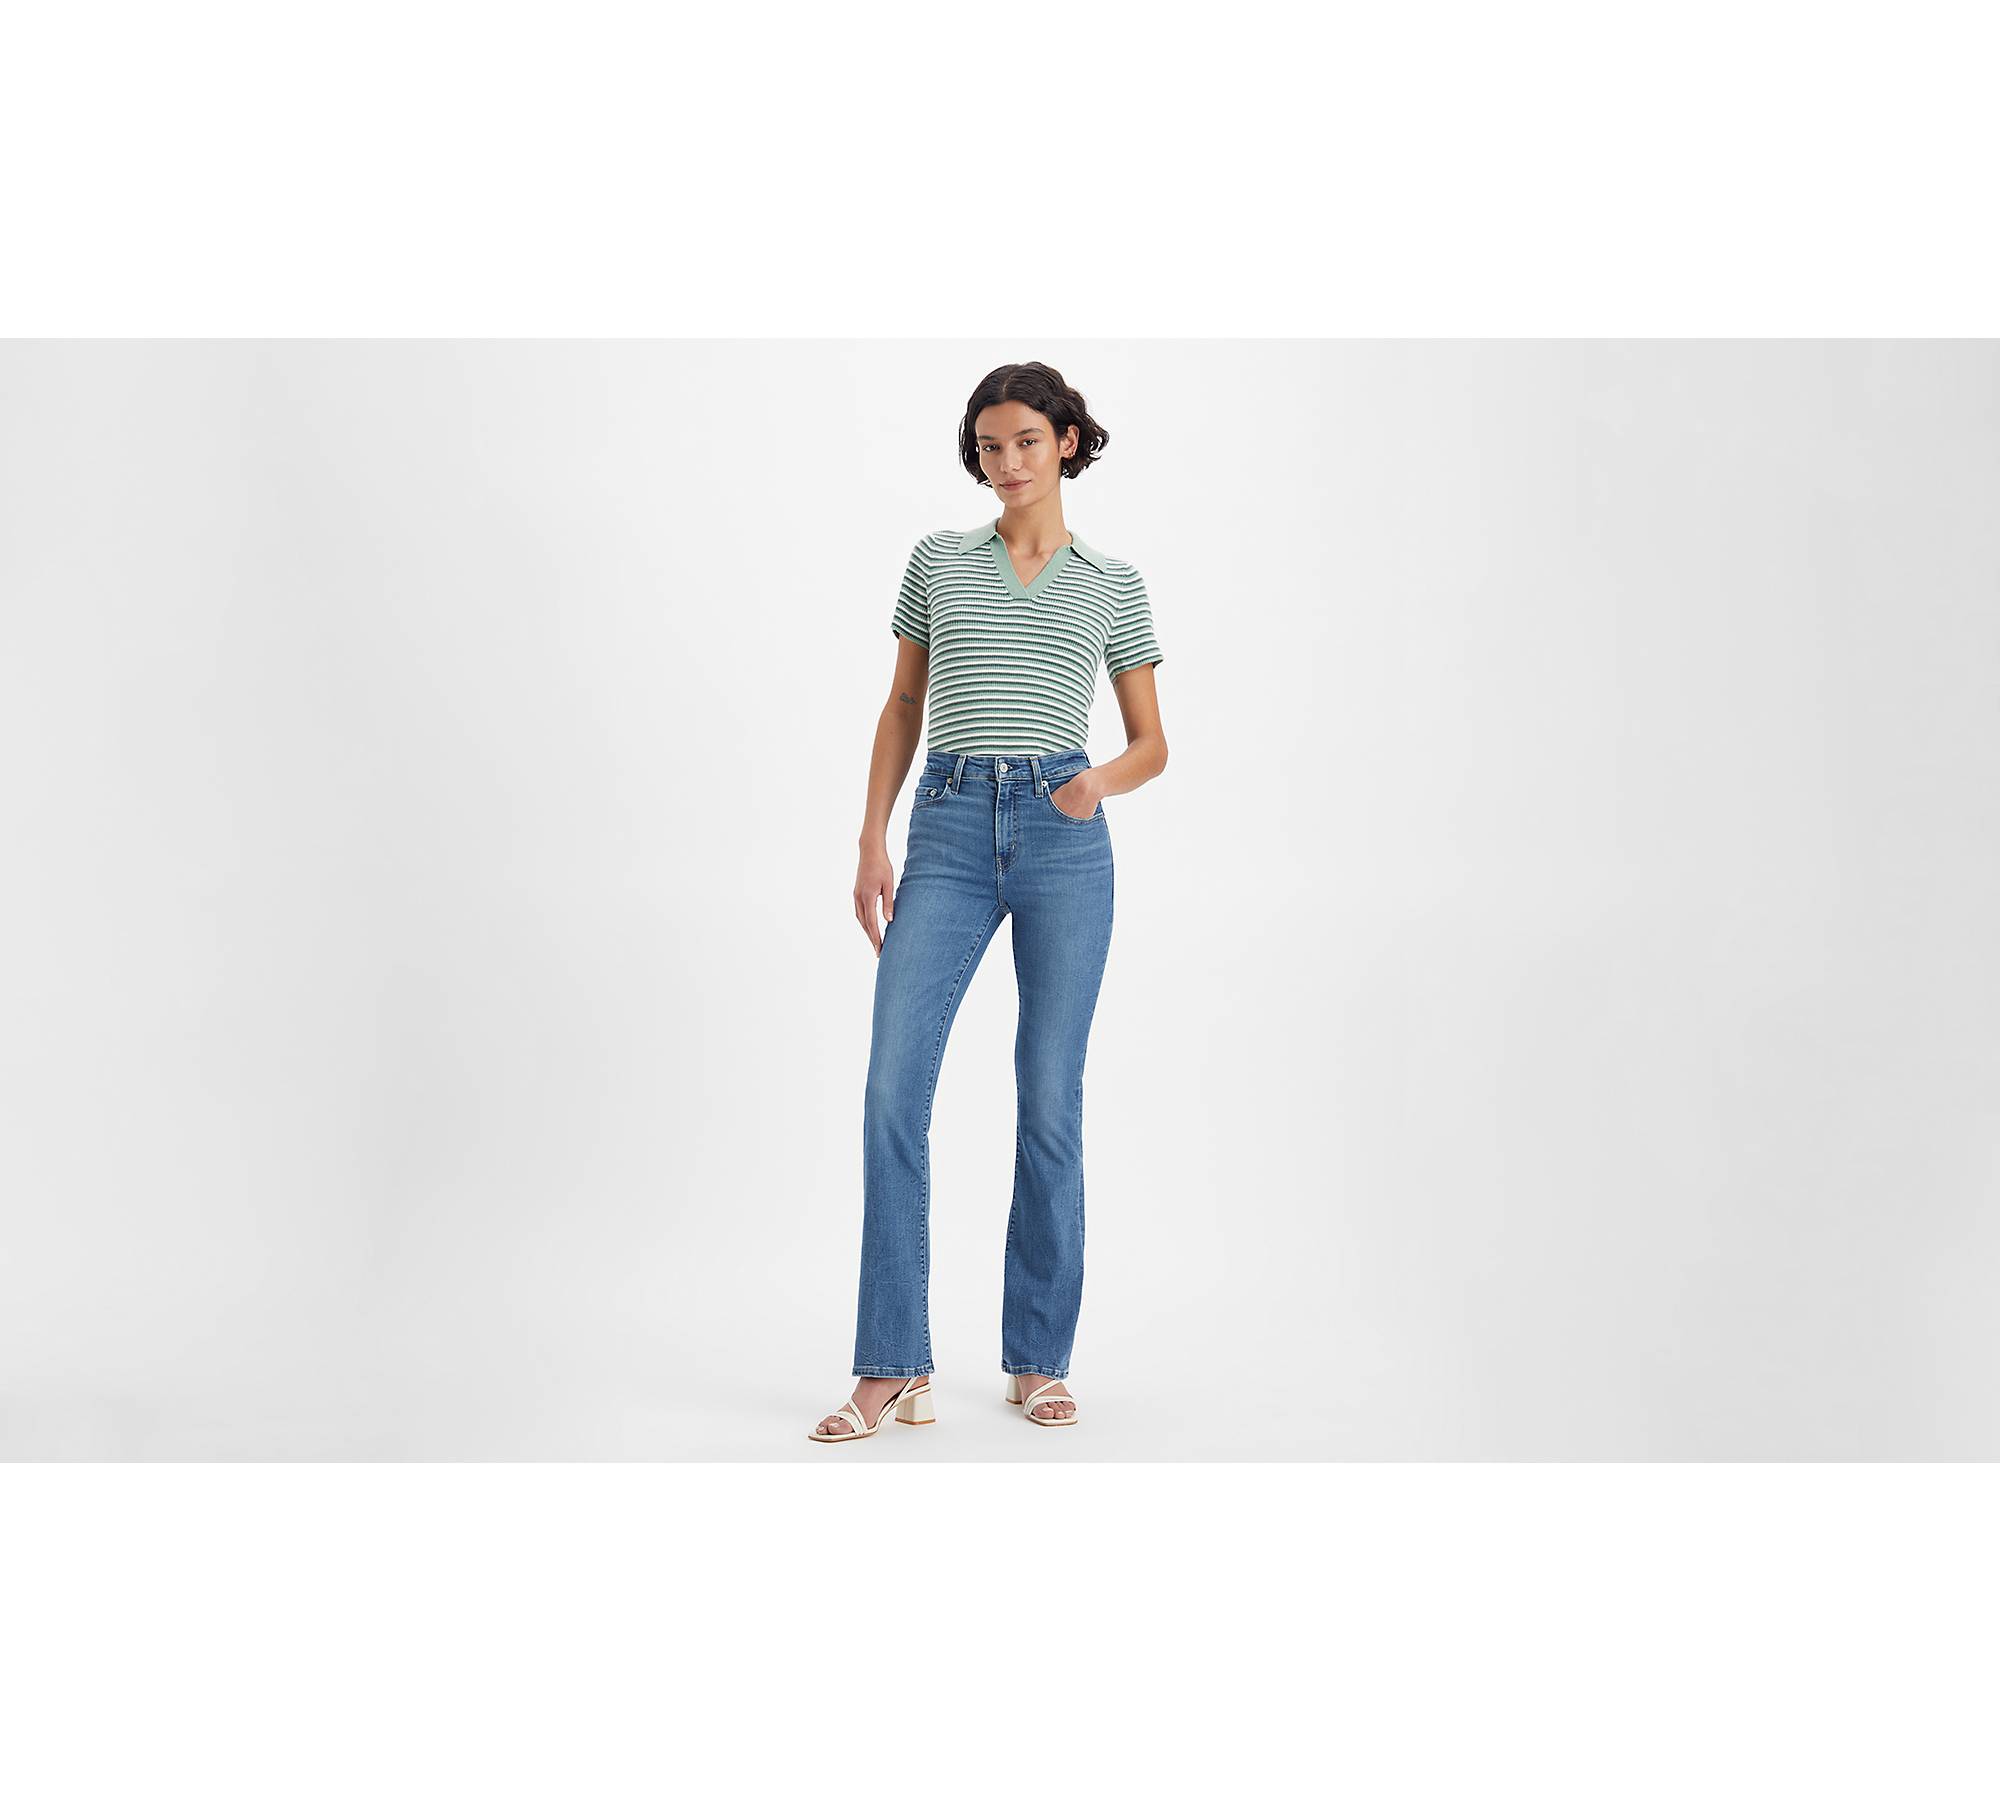 Le Silhouette Slim Bootcut Jeans In Long Inseam Plus Size With High Rise -  Amour Blue | NYDJ